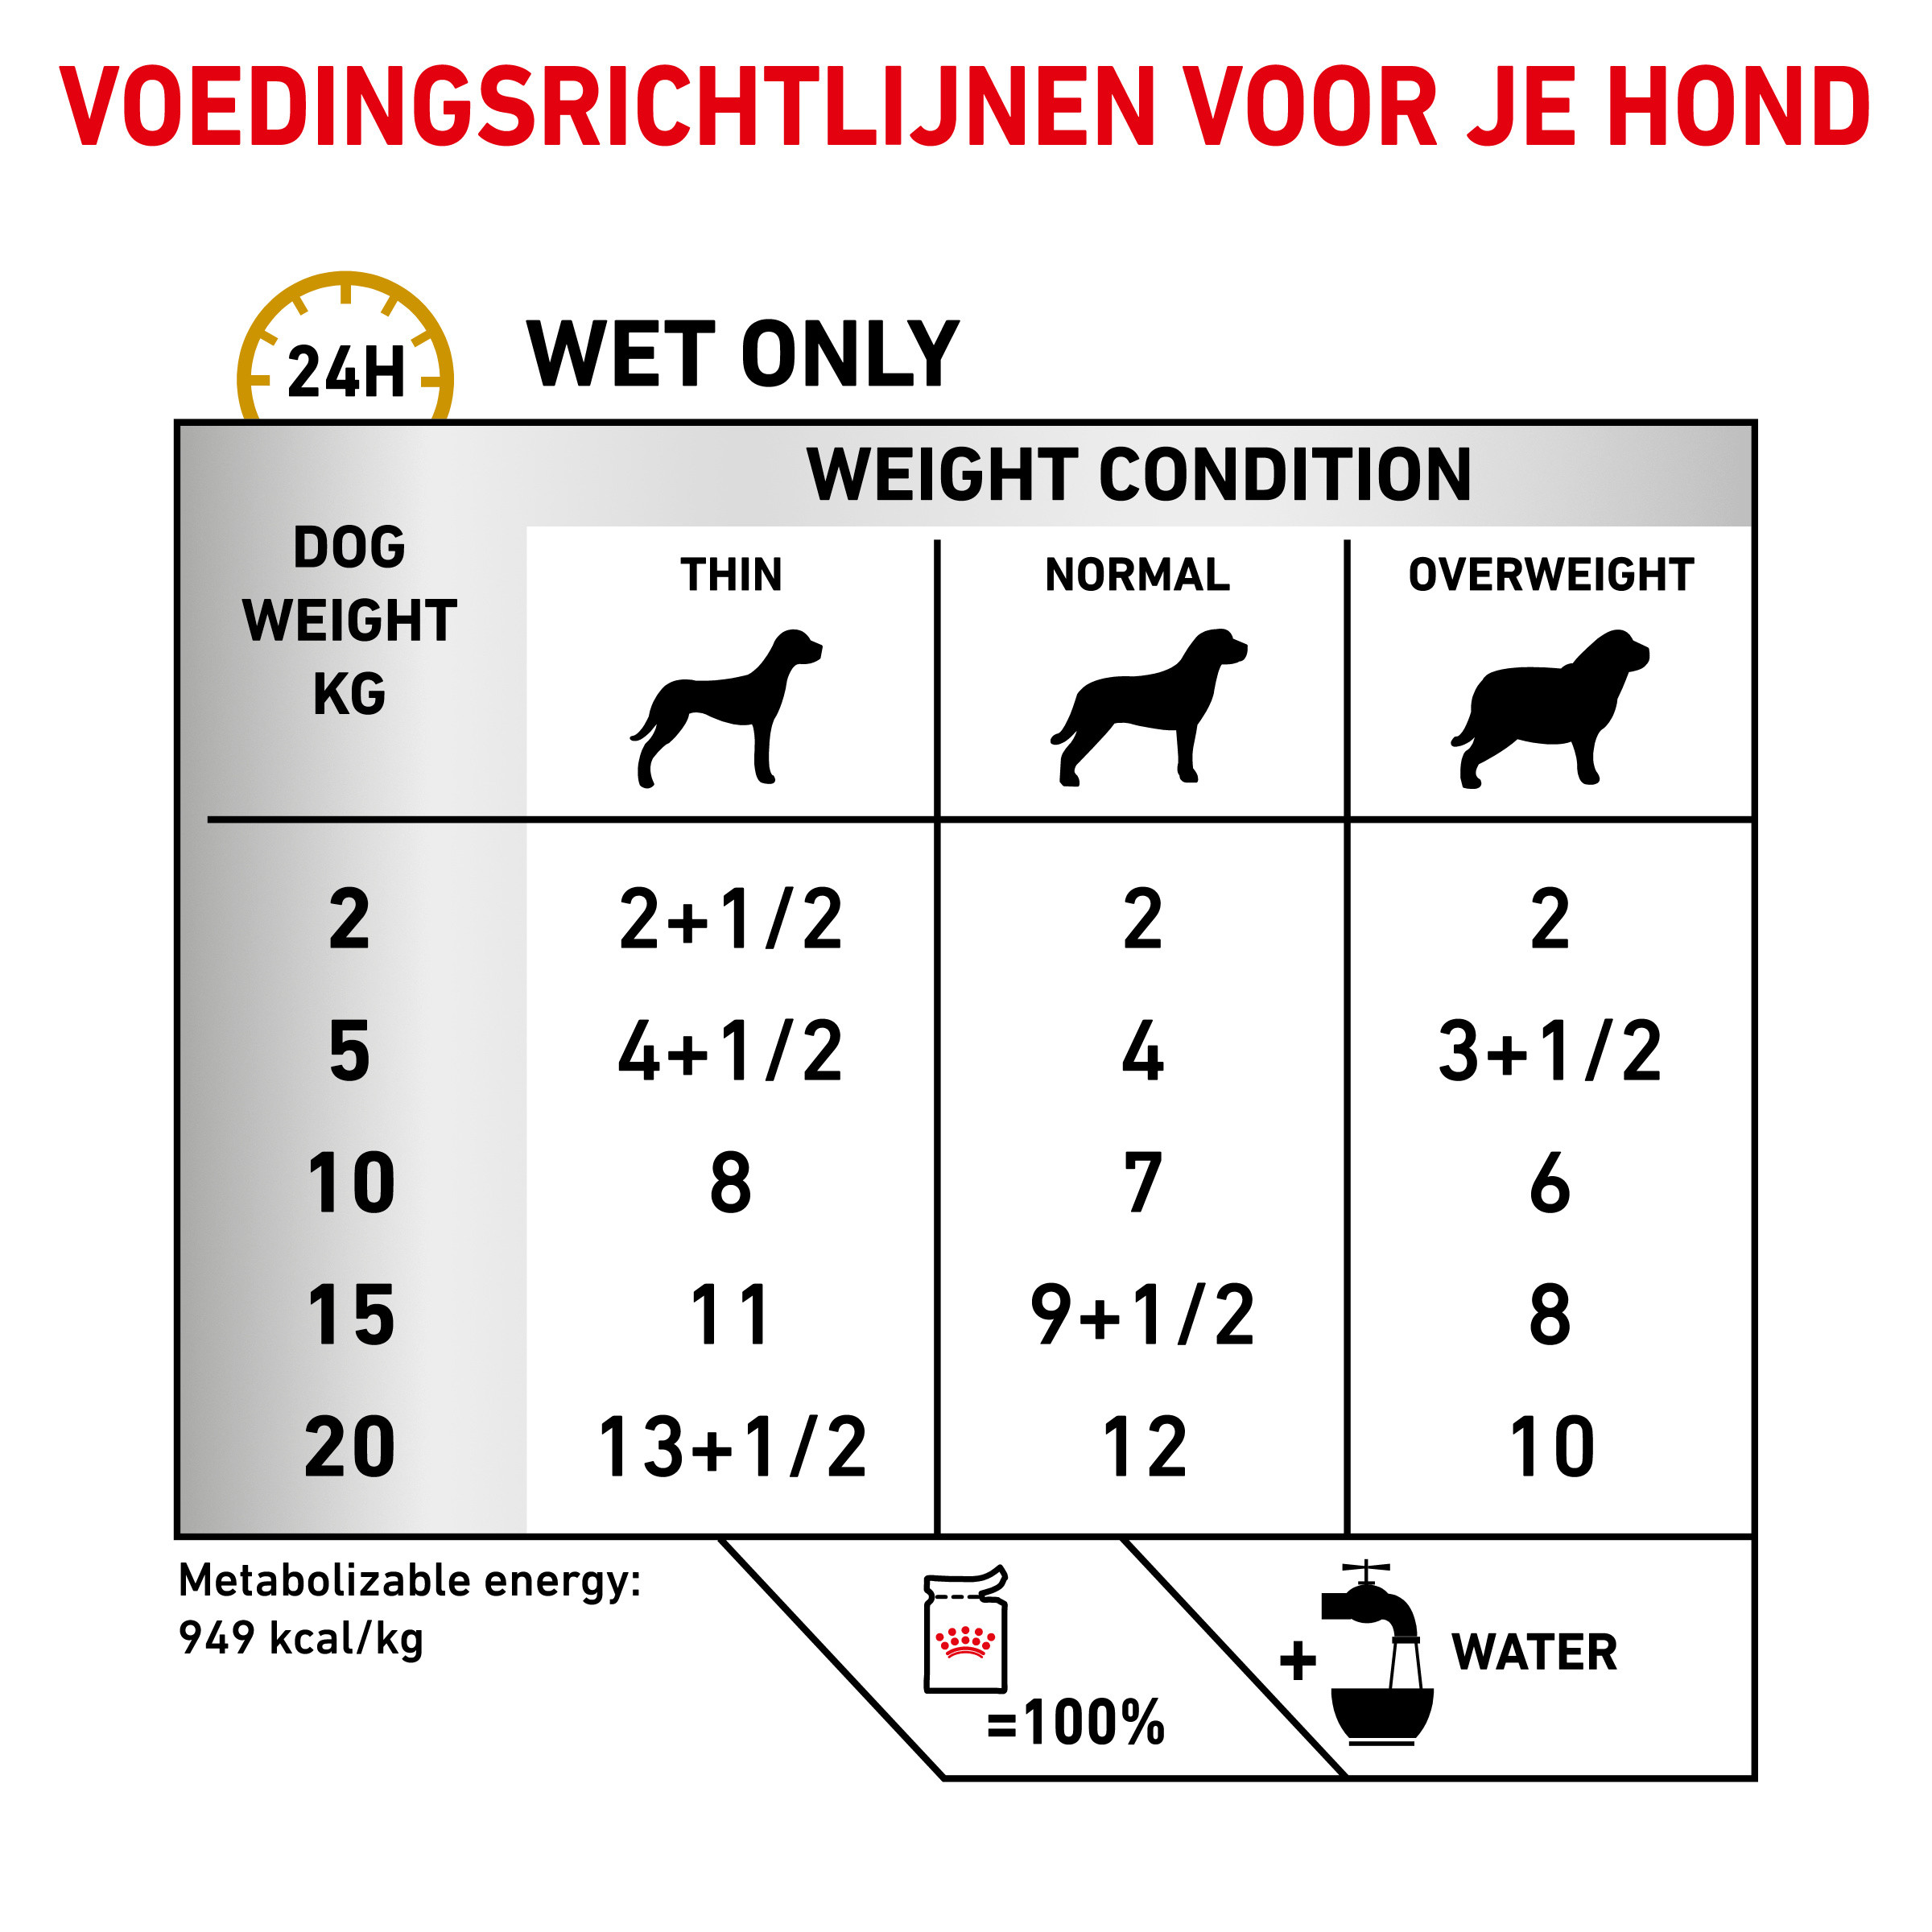 Royal Canin Urinary S/O Ageing 7+ Pouch 100 gr hondenvoer